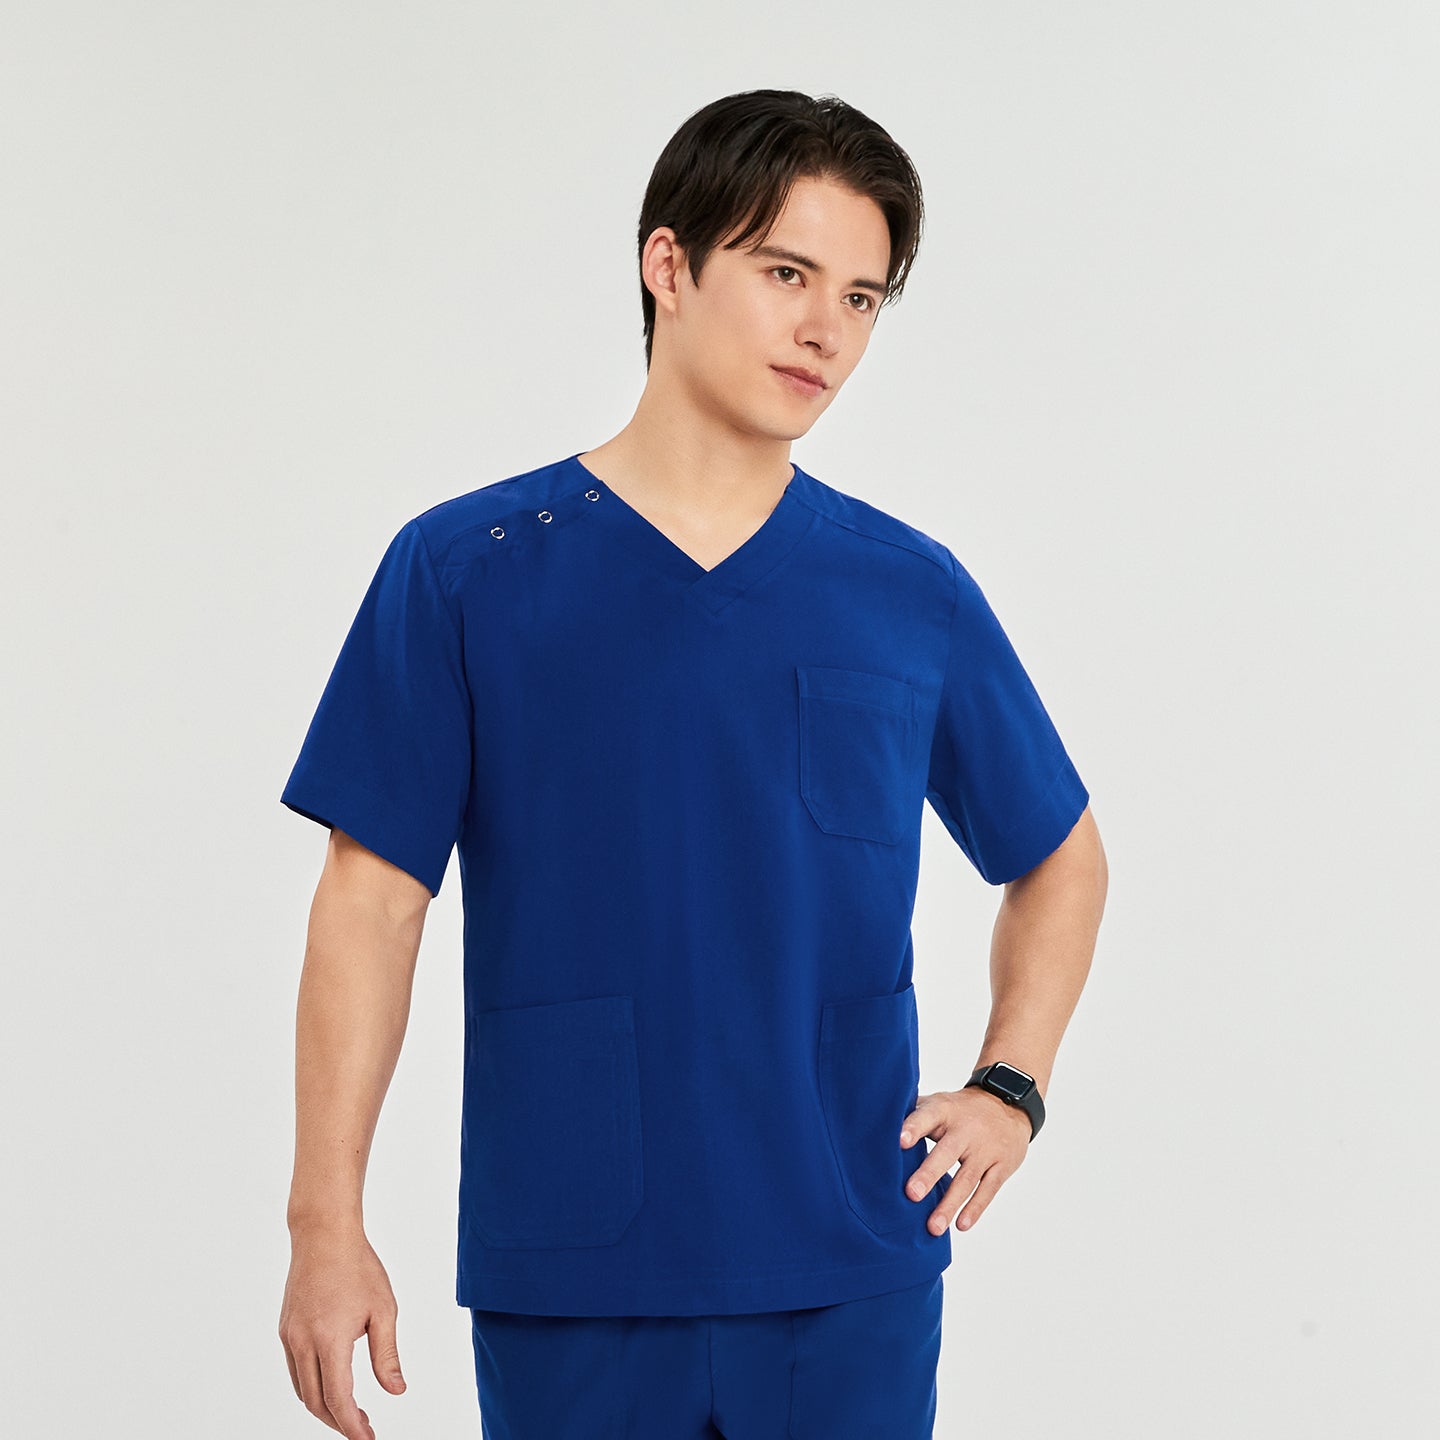  A man standing confidently, wearing a scrub top with a V-neck, three-button detail on the shoulder, and multiple pockets,Royal Blue